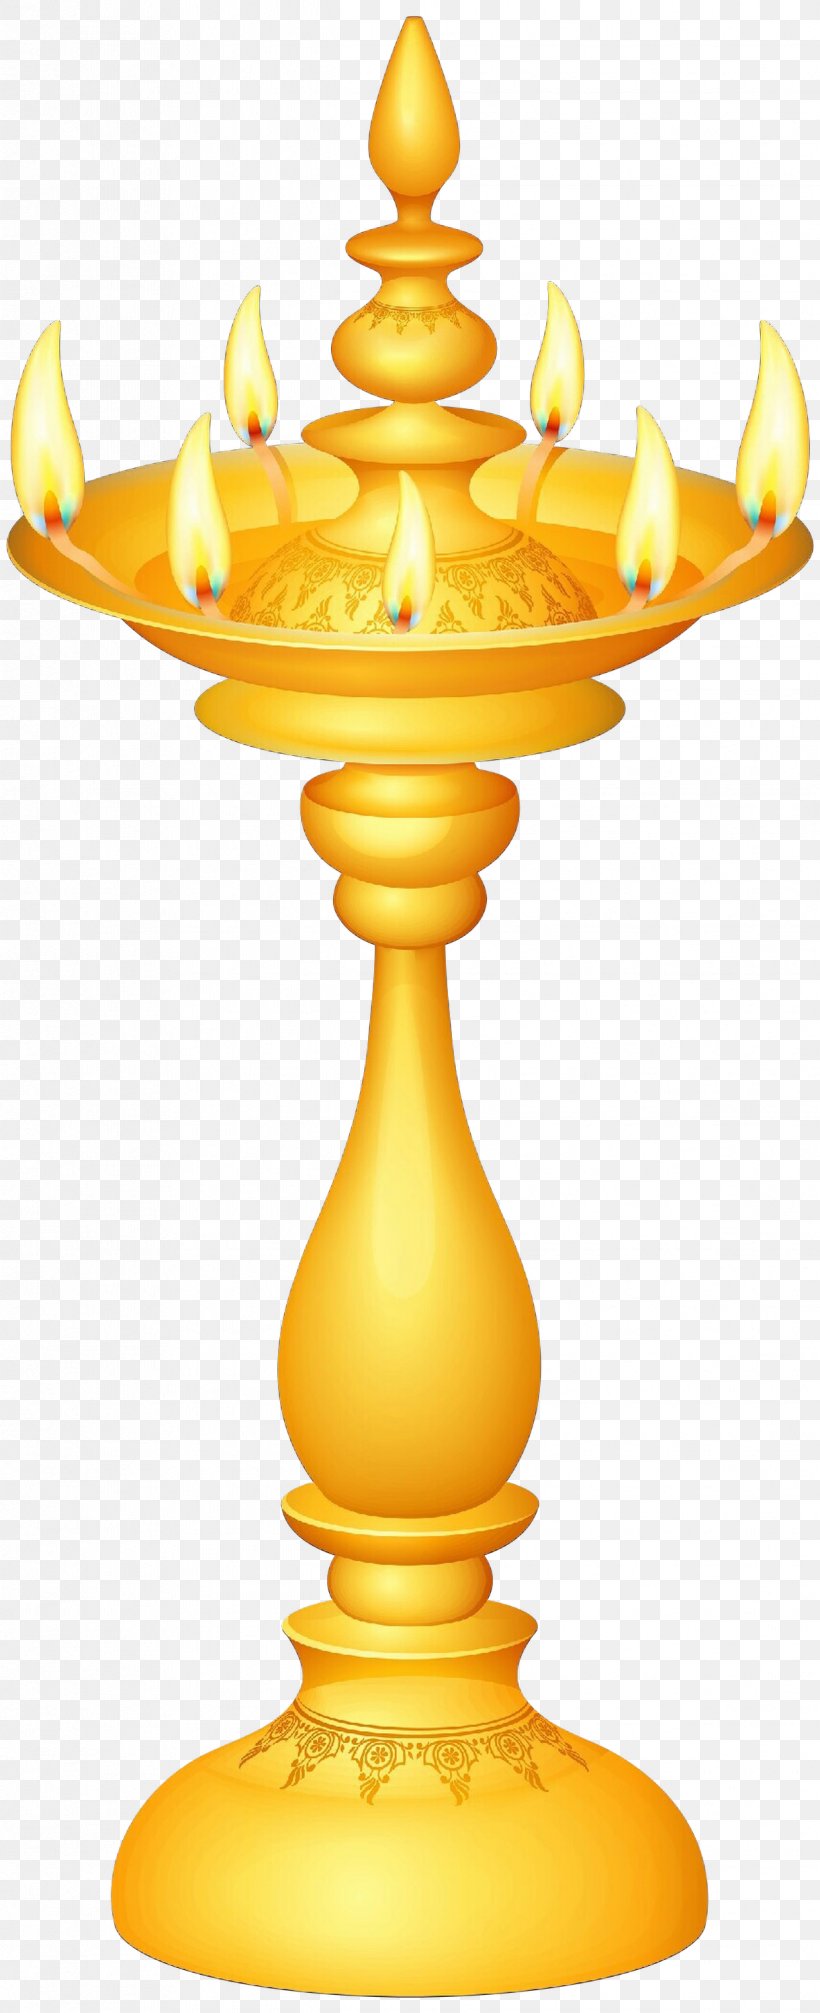 Yellow Clip Art Candle Holder Oil Lamp Light Fixture, PNG, 1221x2998px ...